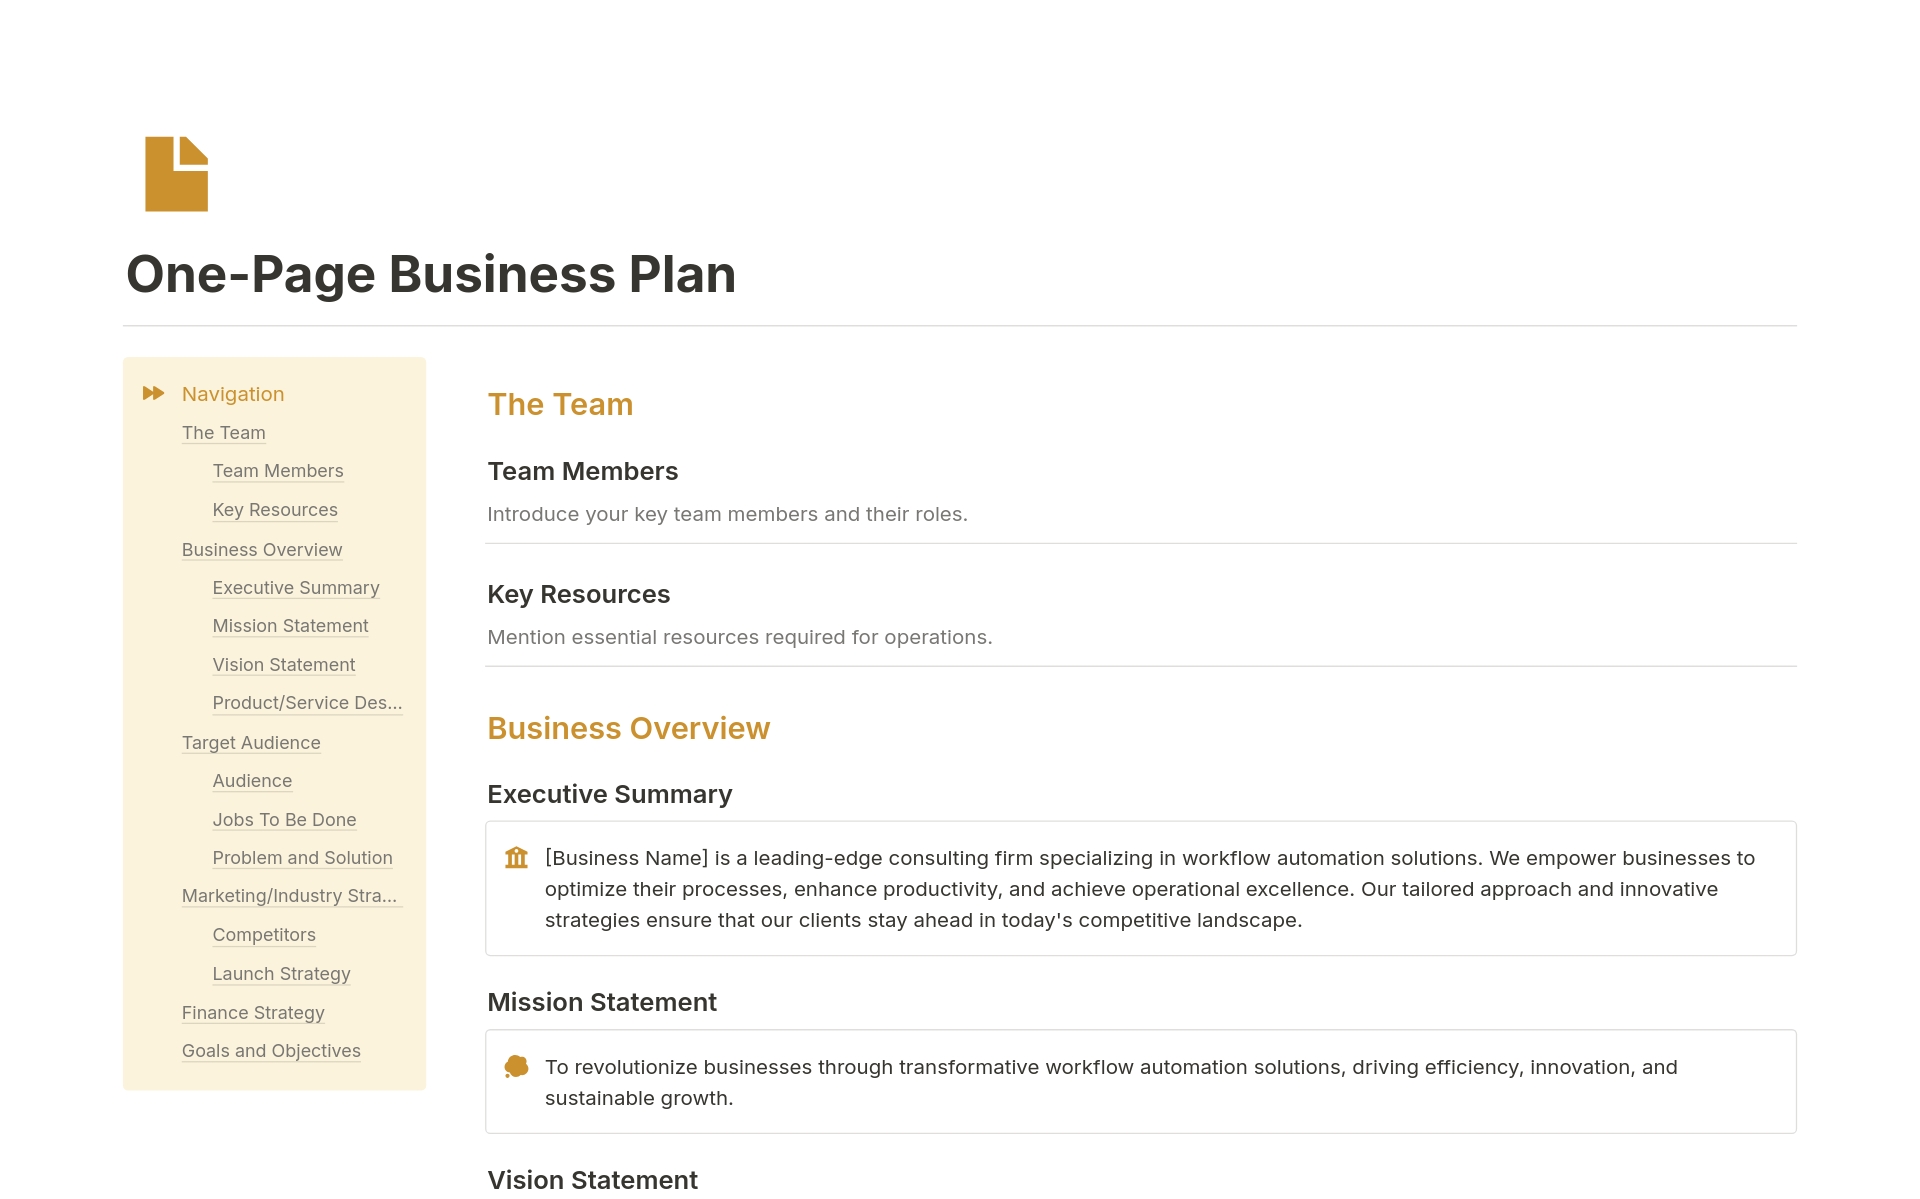 Bring your business planning into one simple page with the One-Page Business Plan template.

Clean, simple, and easy to navigate, this template streamlines your strategy, objectives, and action plans onto a single page. Customize it to reflect your brand and add your own content 